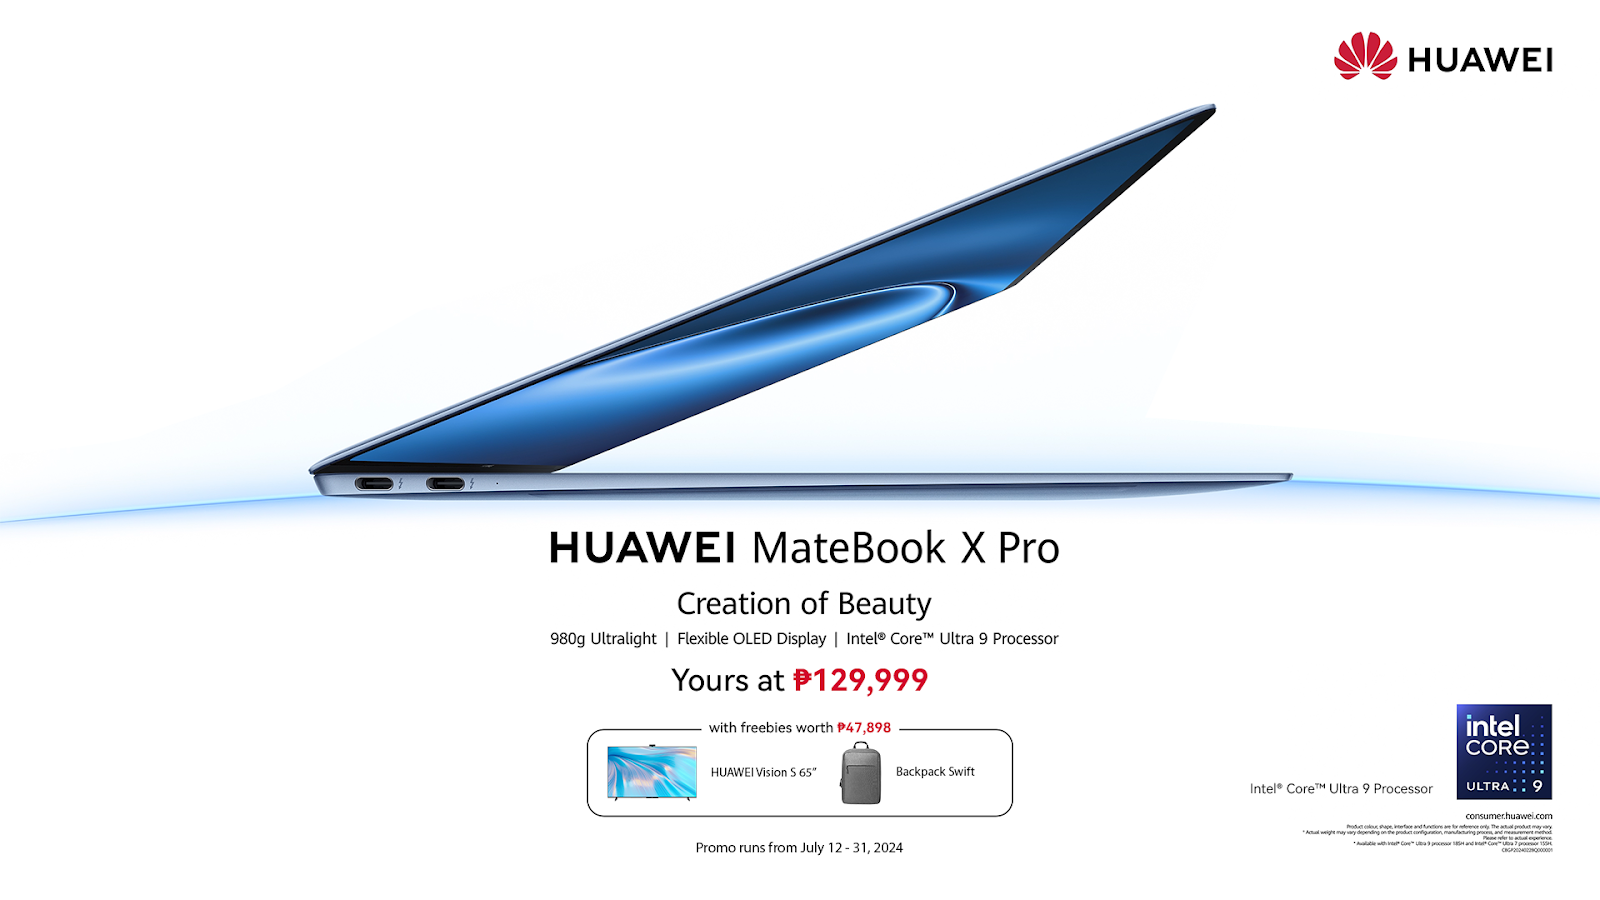 Brace Yourself for a Revolution in Lightness and Performance, HUAWEI MateBook X Pro and MateBook 14 Now Available in the Philippines!